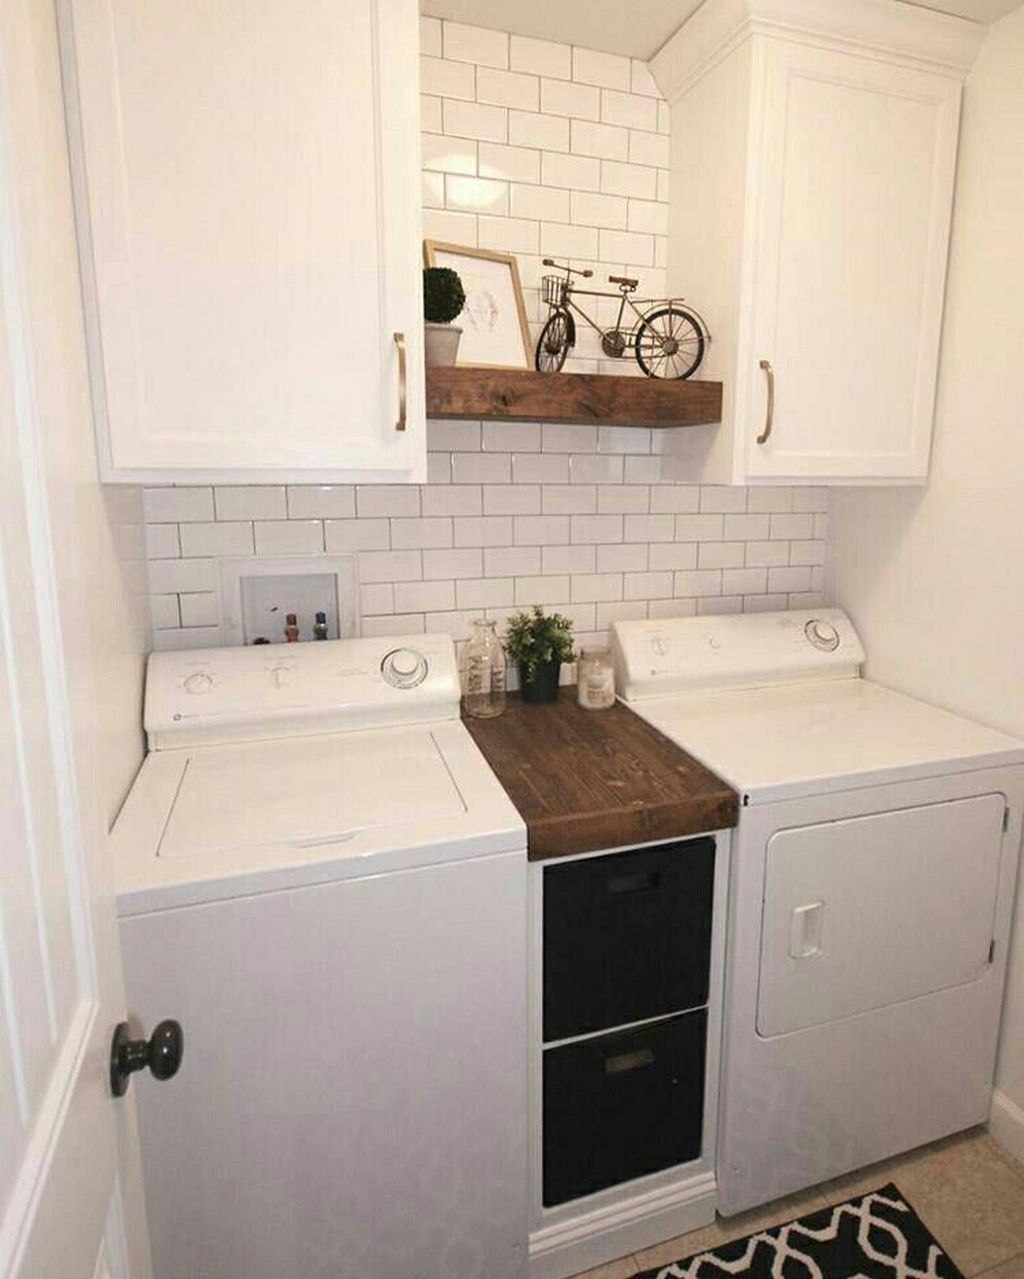 38 The Best Laundry Room Design Ideas You Must Have - HMDCRTN